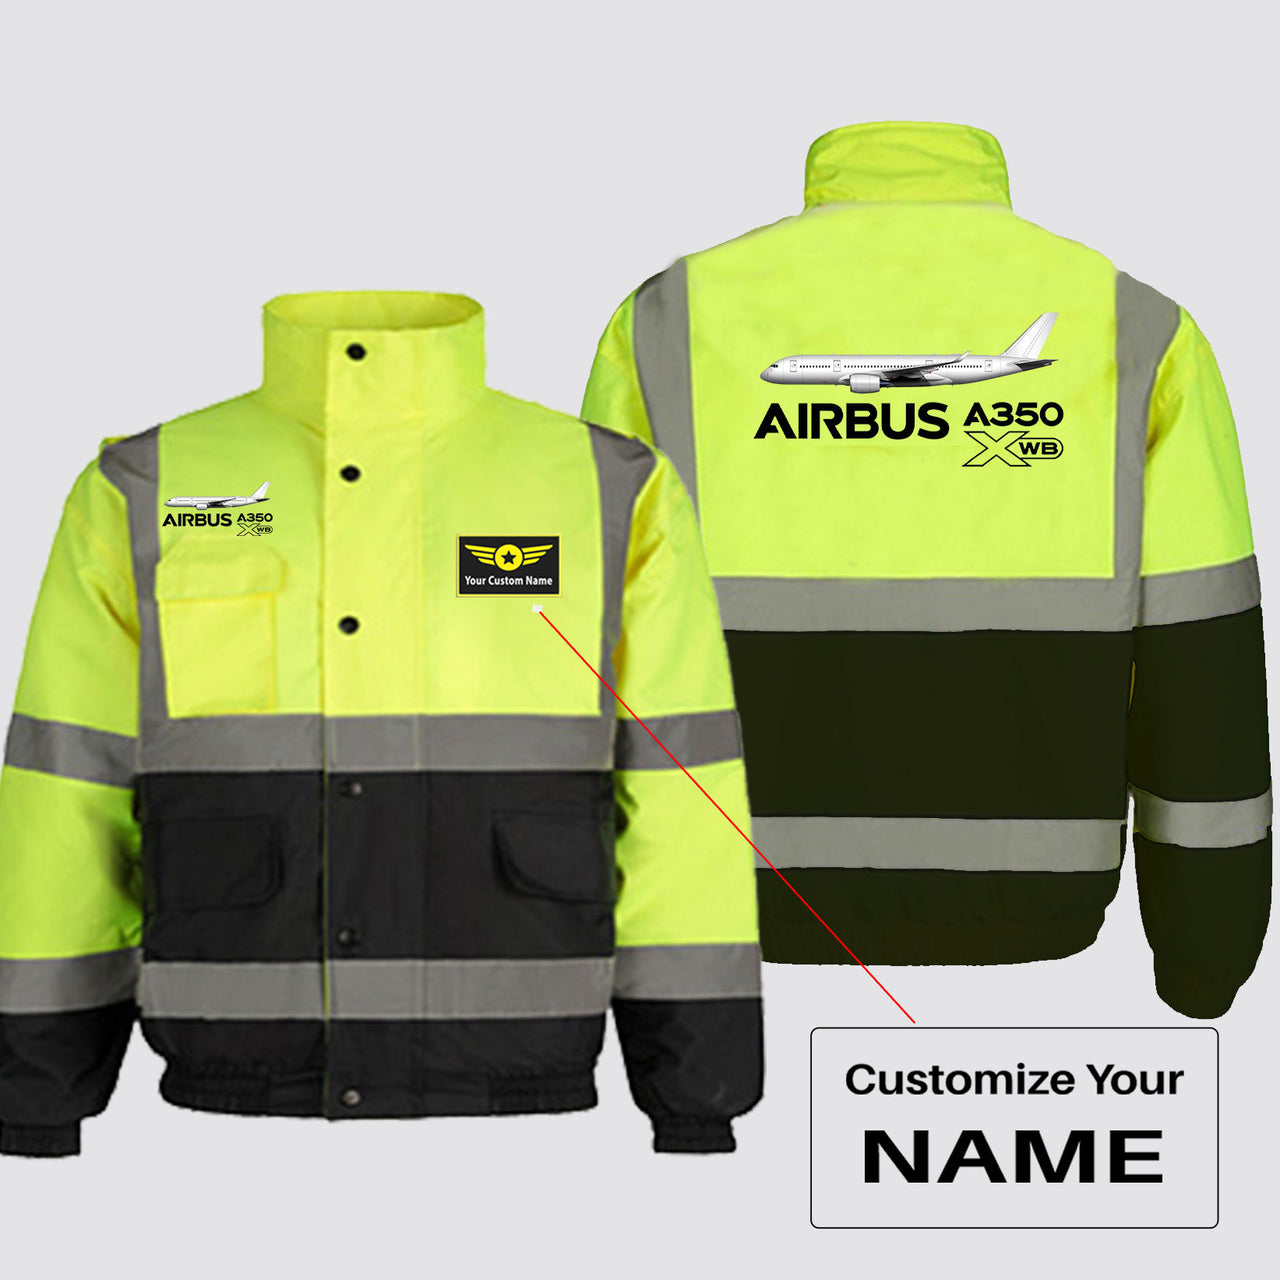 The Airbus A350 WXB Designed Reflective Winter Jackets